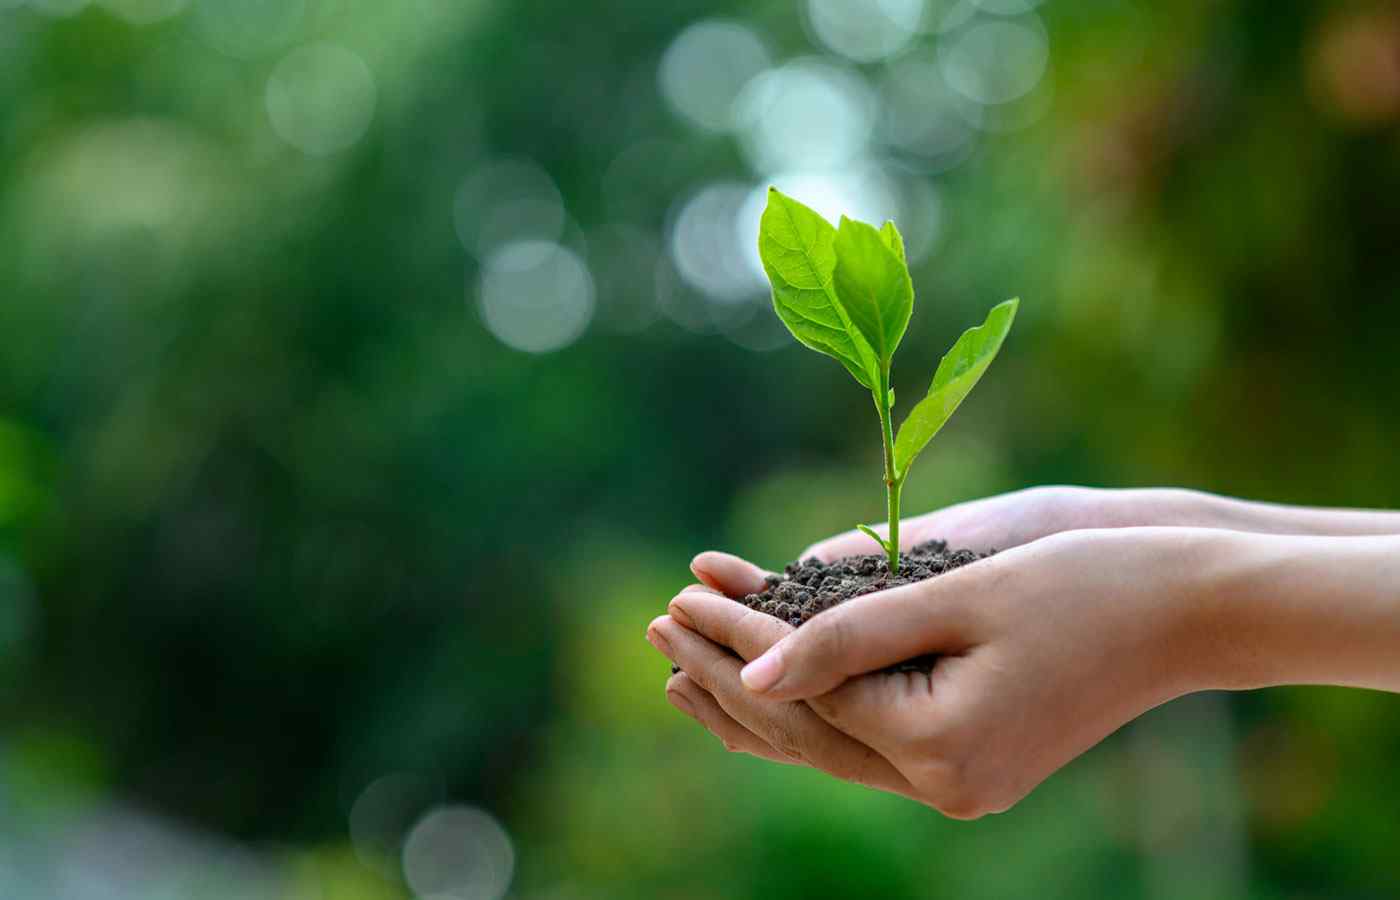 environment providing growth opportunities for portfolios of investors